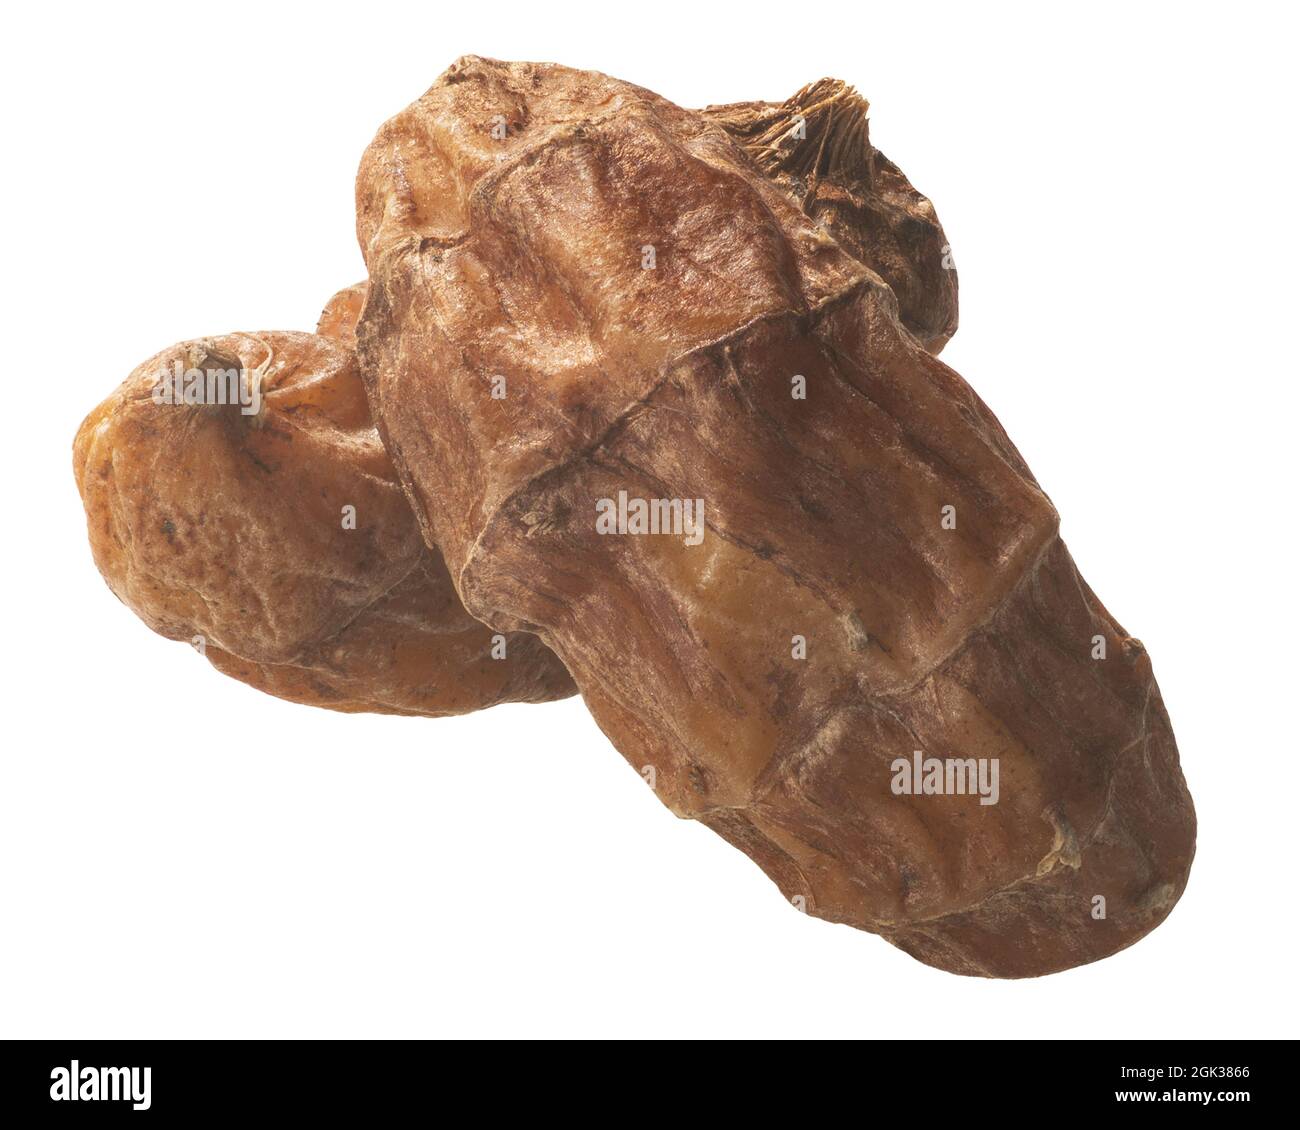 Chufa tiger nuts (Cyperus esculentus tuubers), dried, isolated Stock Photo